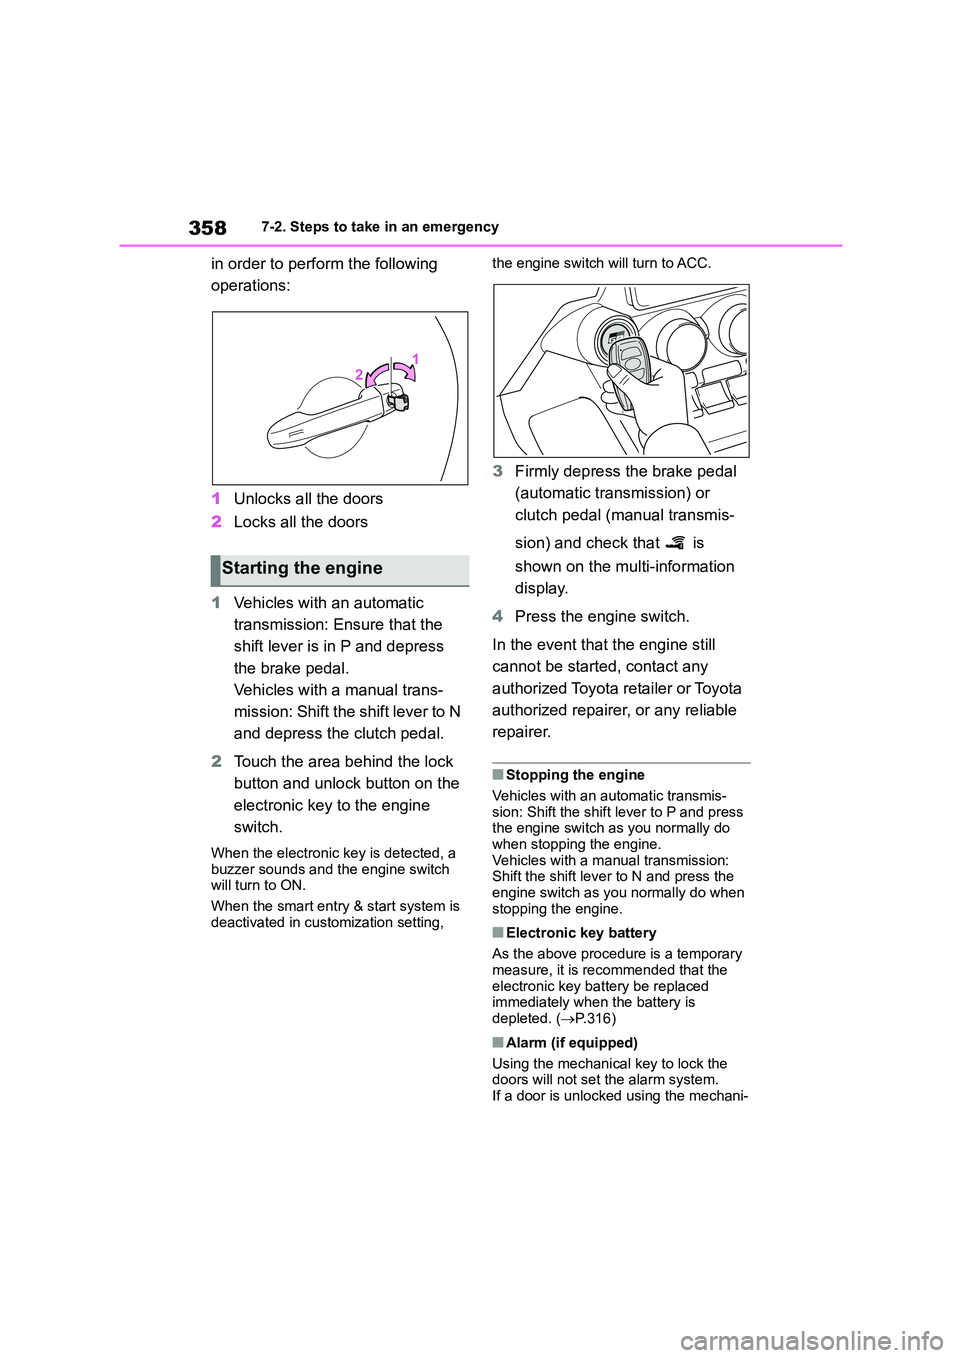 TOYOTA GR86 2022  Owners Manual (in English) 3587-2. Steps to take in an emergency
in order to perform the following  
operations: 
1 Unlocks all the doors 
2 Locks all the doors 
1 Vehicles with an automatic  
transmission: Ensure that the 
shi